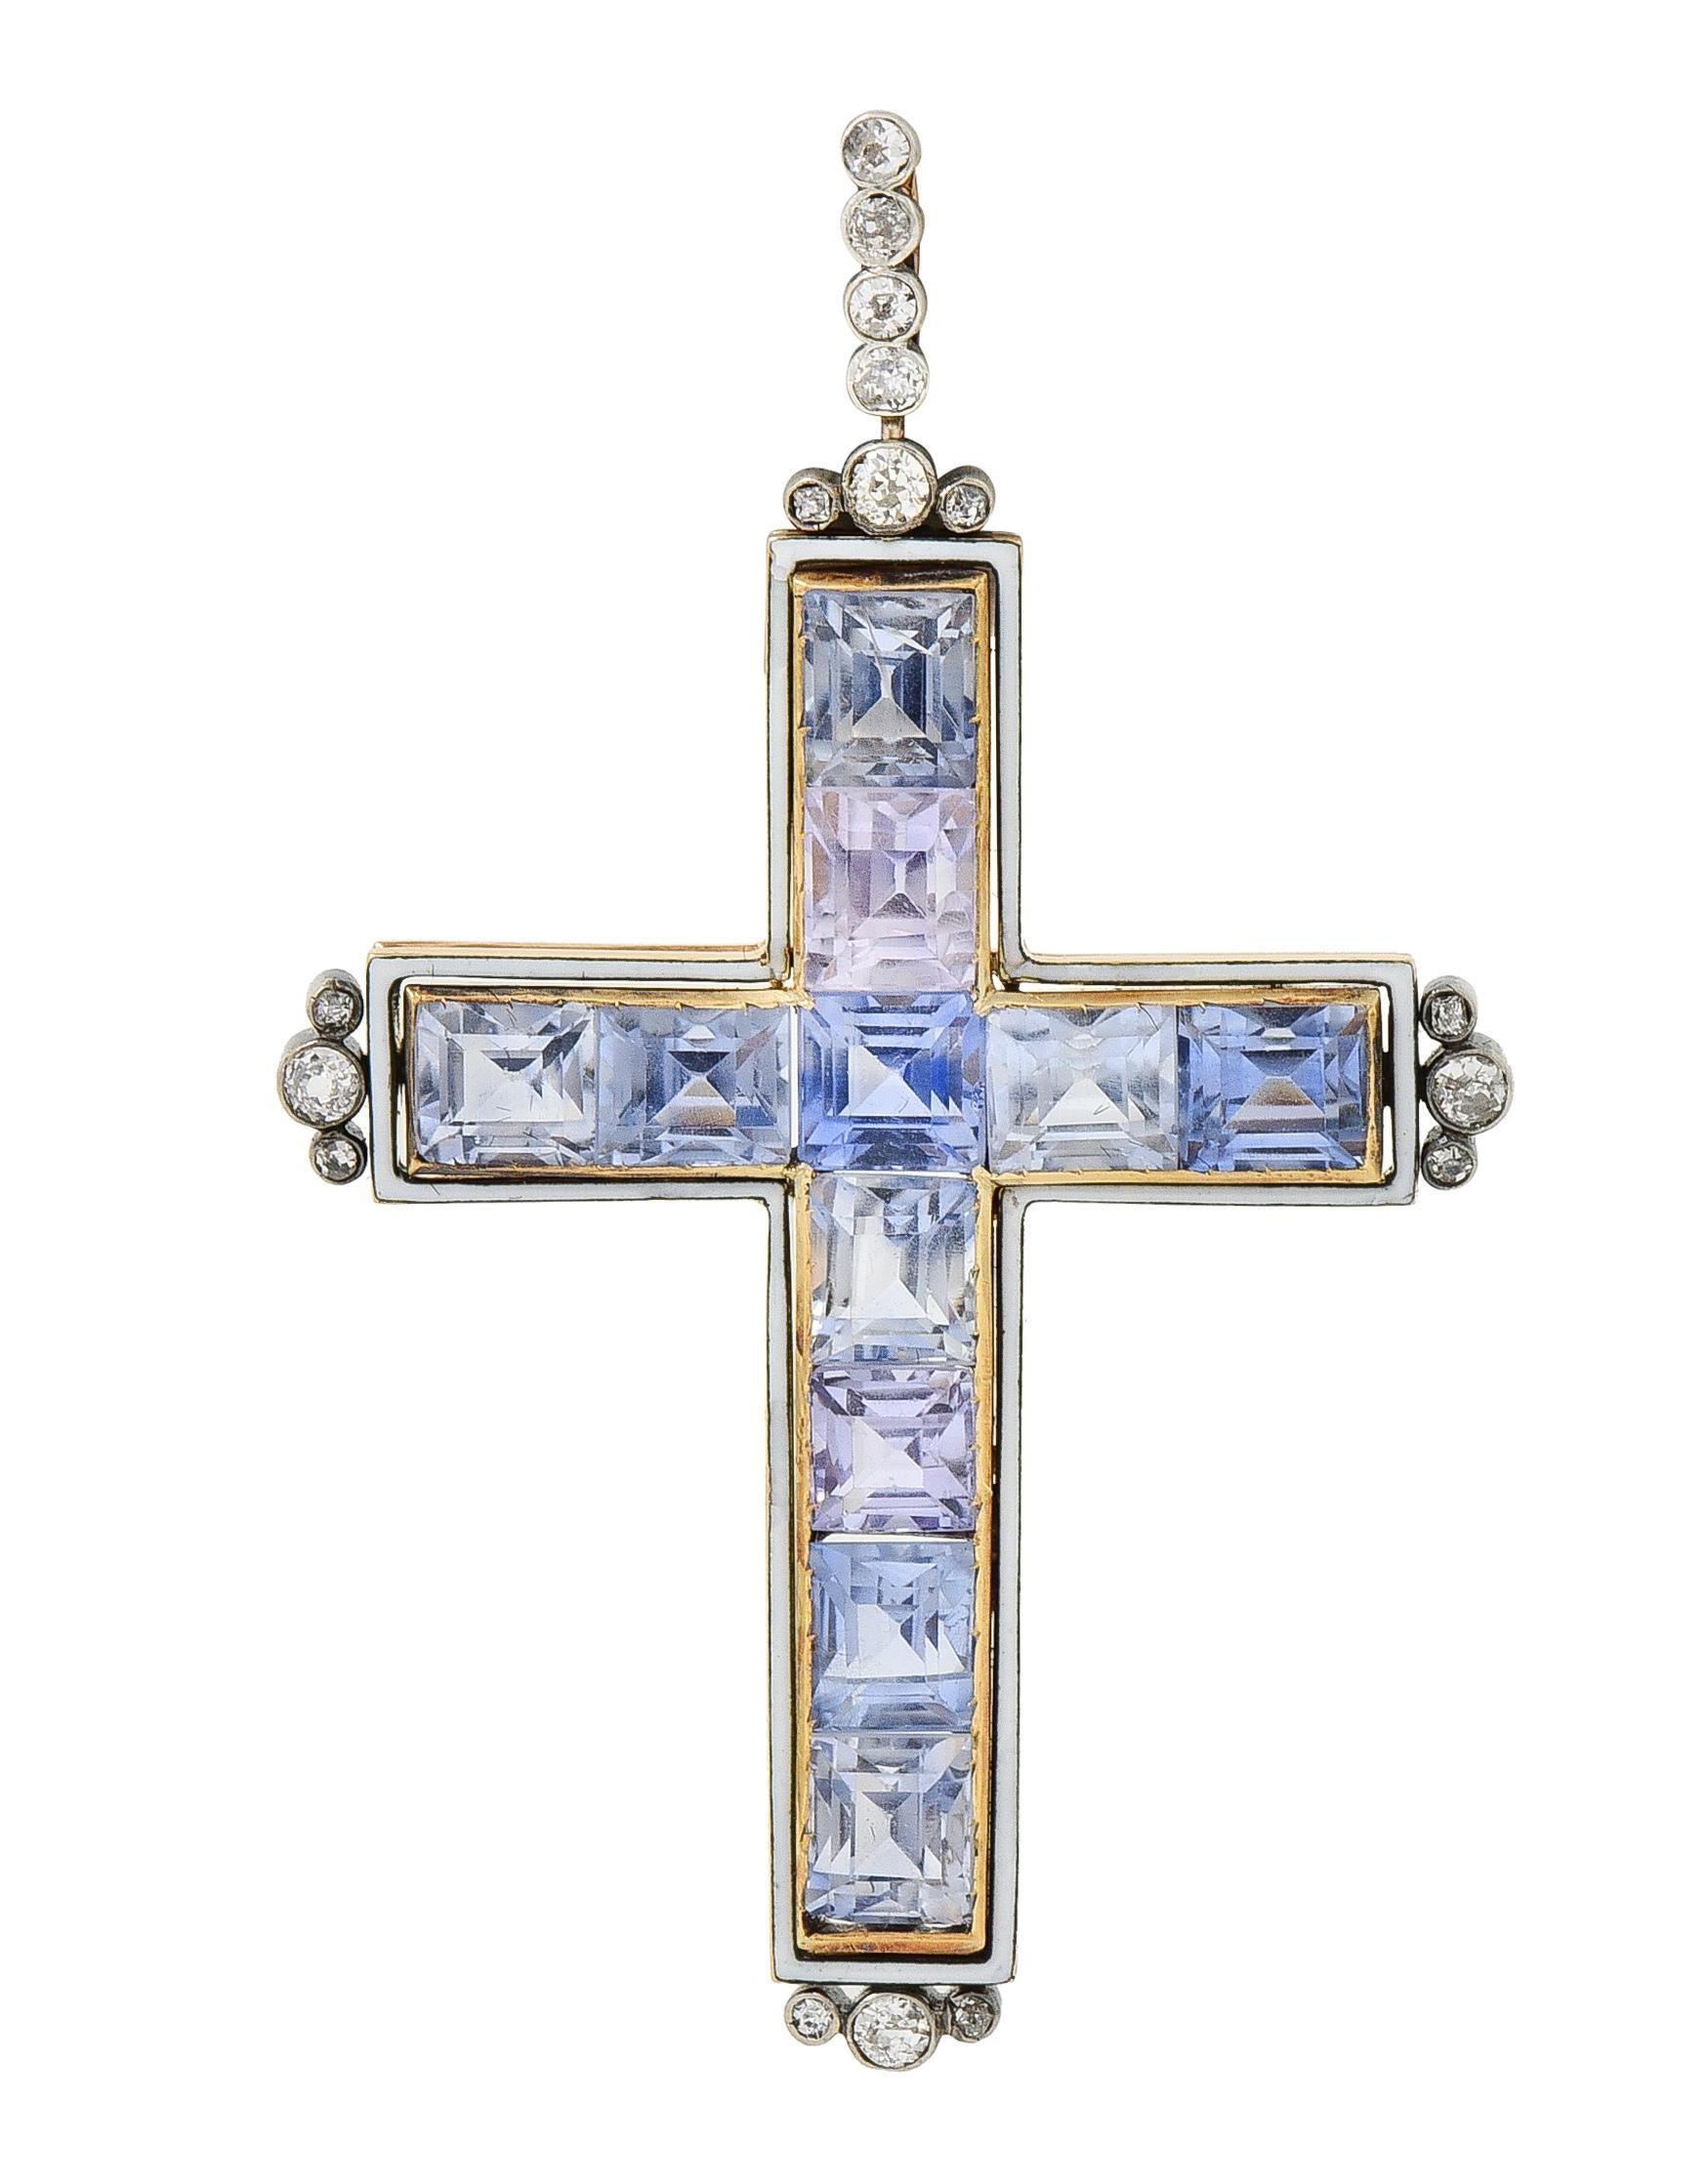 Featuring rectangular mixed-cut sapphires channel set in cross-formation
Weighing approximately 20.24 carats total - ranging in color 
Transparent light grayish blue, light blue, and light lavender 
With a floating halo of opaque white enamel -